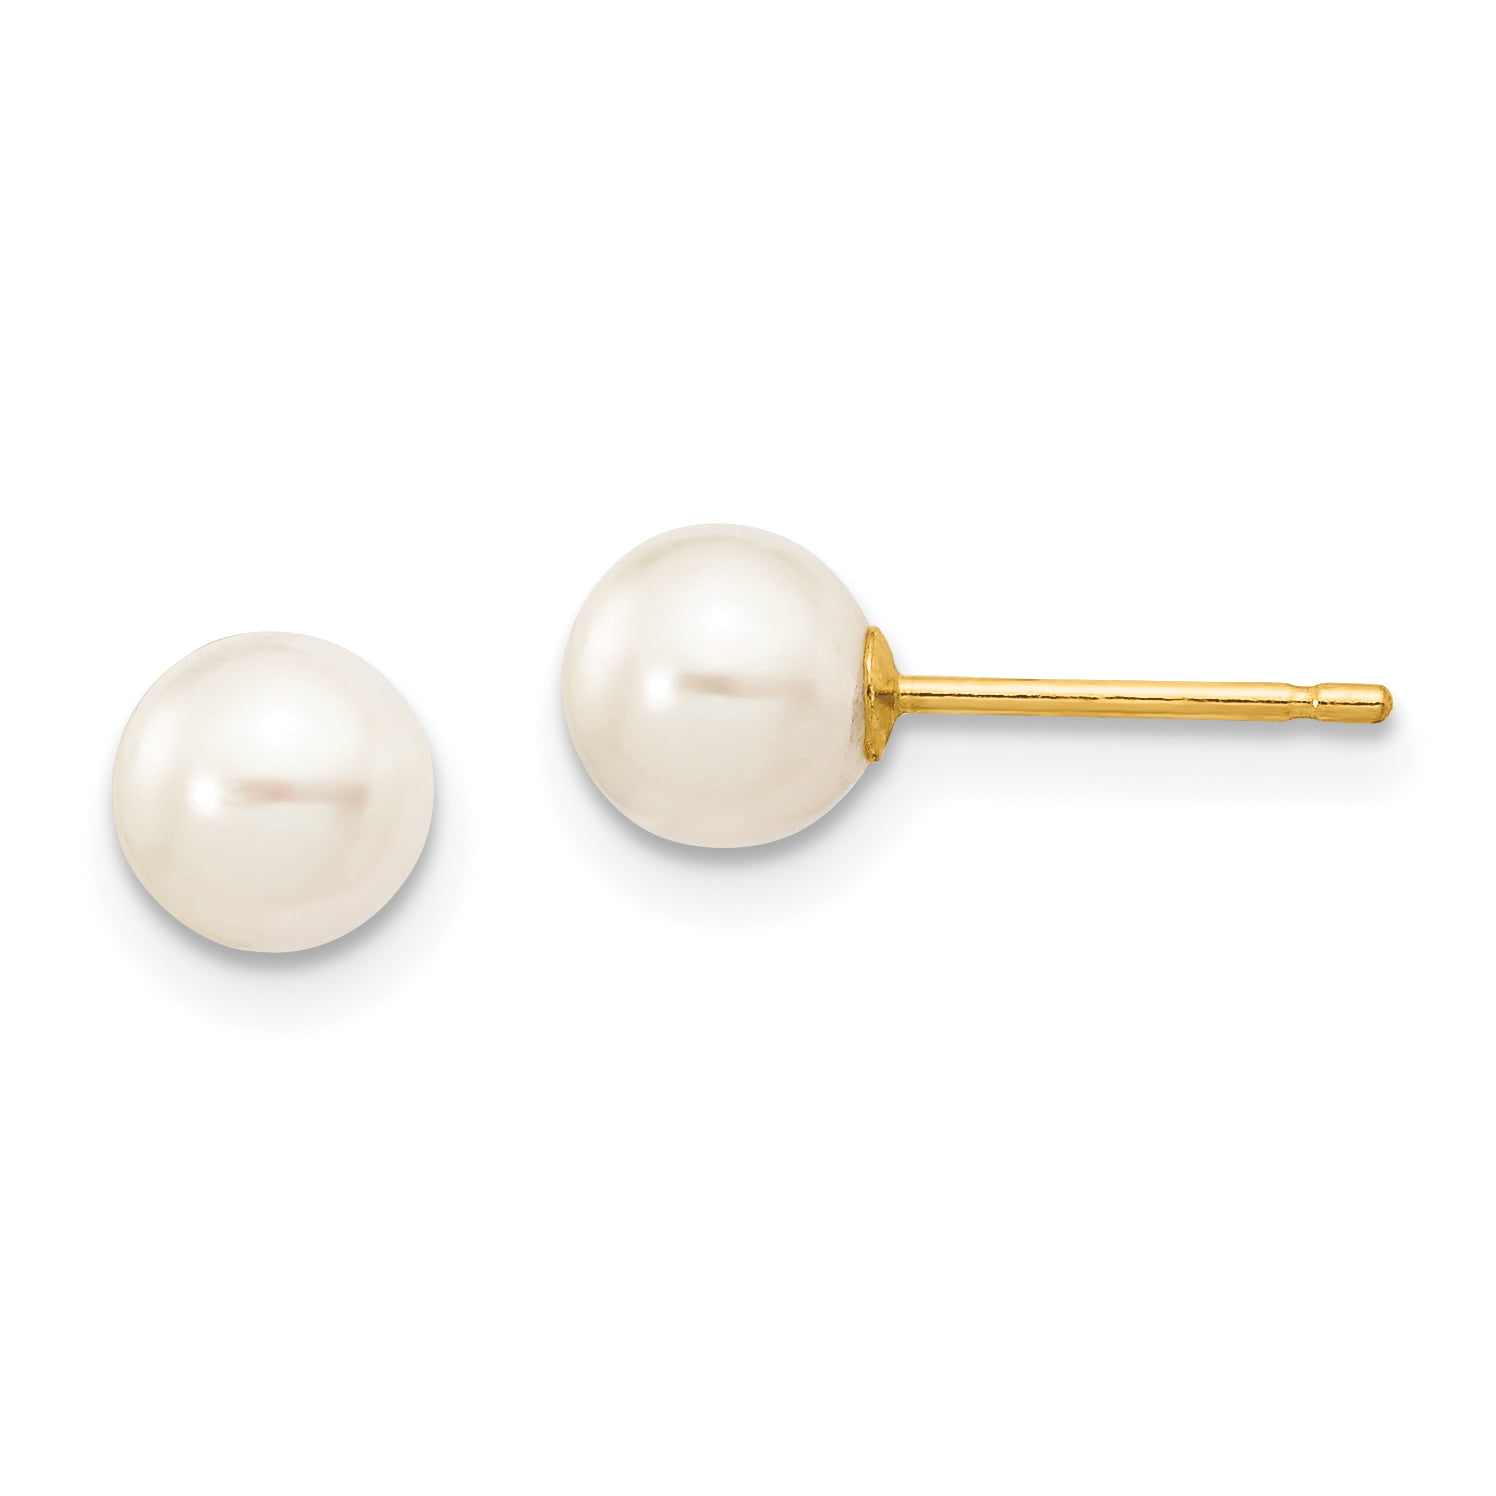 Details about   18K Gold Round Ball Drop Earrings 6-7mm Natural Freshwater Pearl Wedding Jewelry 